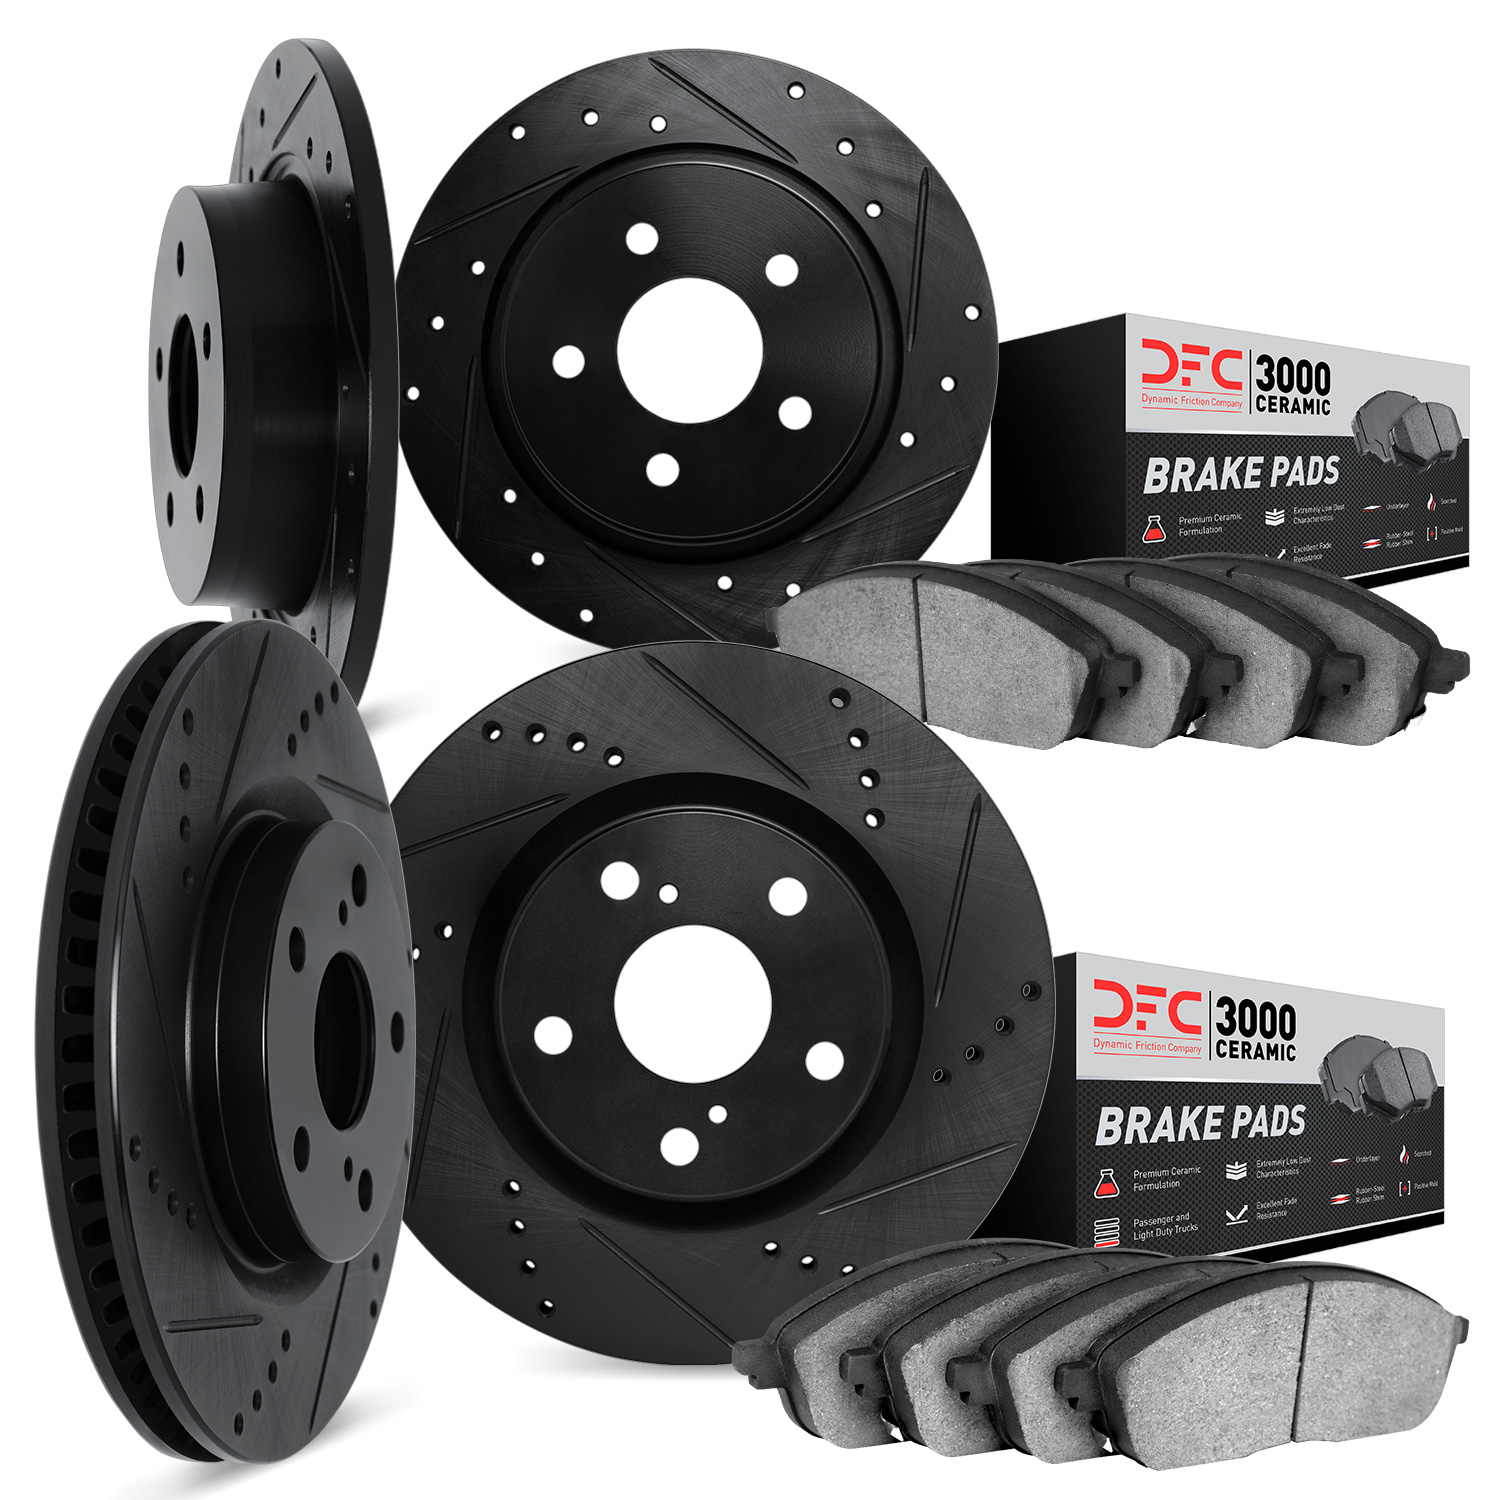 8304-72037 Drilled/Slotted Brake Rotors with 3000-Series Ceramic Brake Pads Kit [Black], 2004-2012 Mitsubishi, Position: Front a